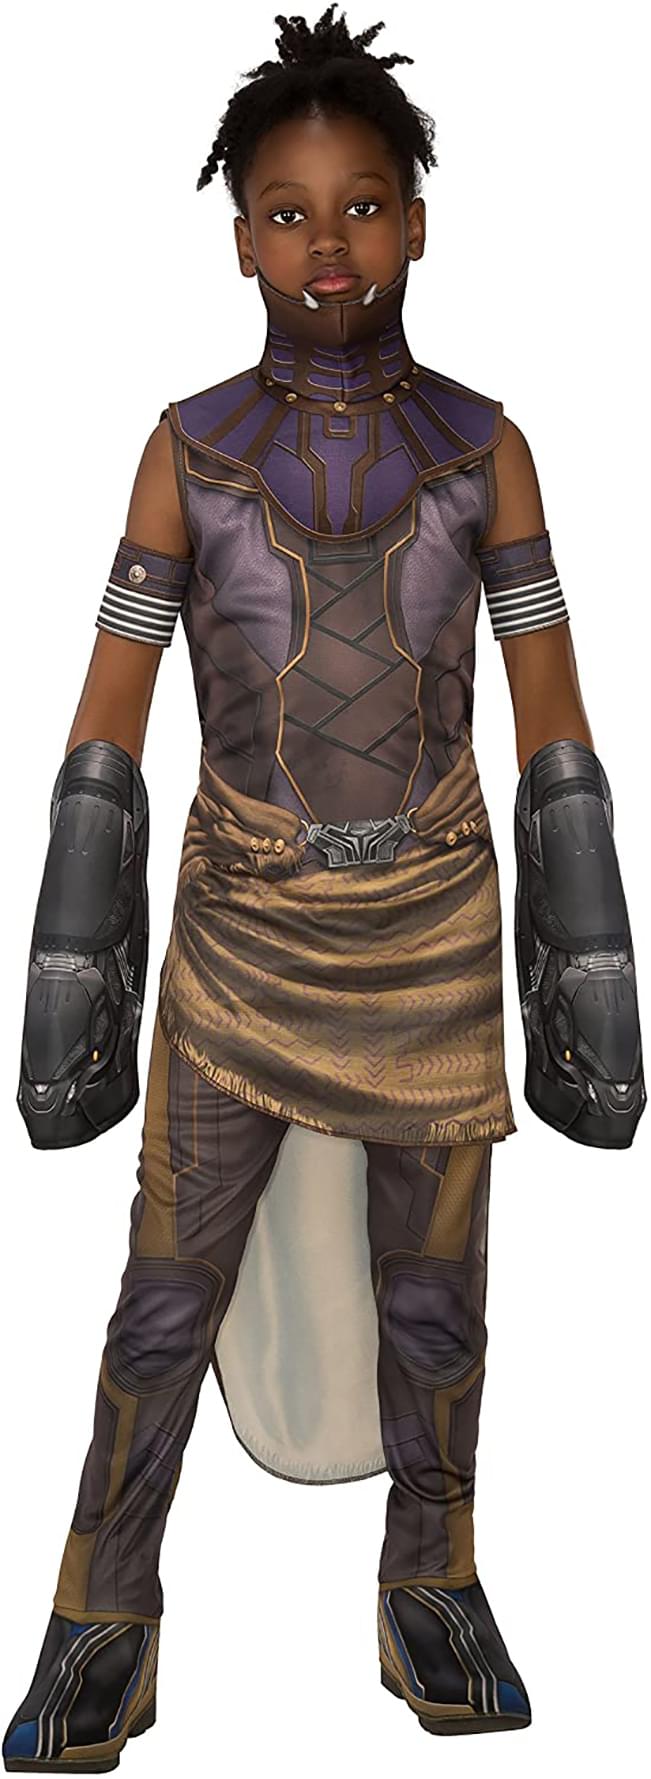 Marvel Black Panther Movie Deluxe Shuri Child Costume